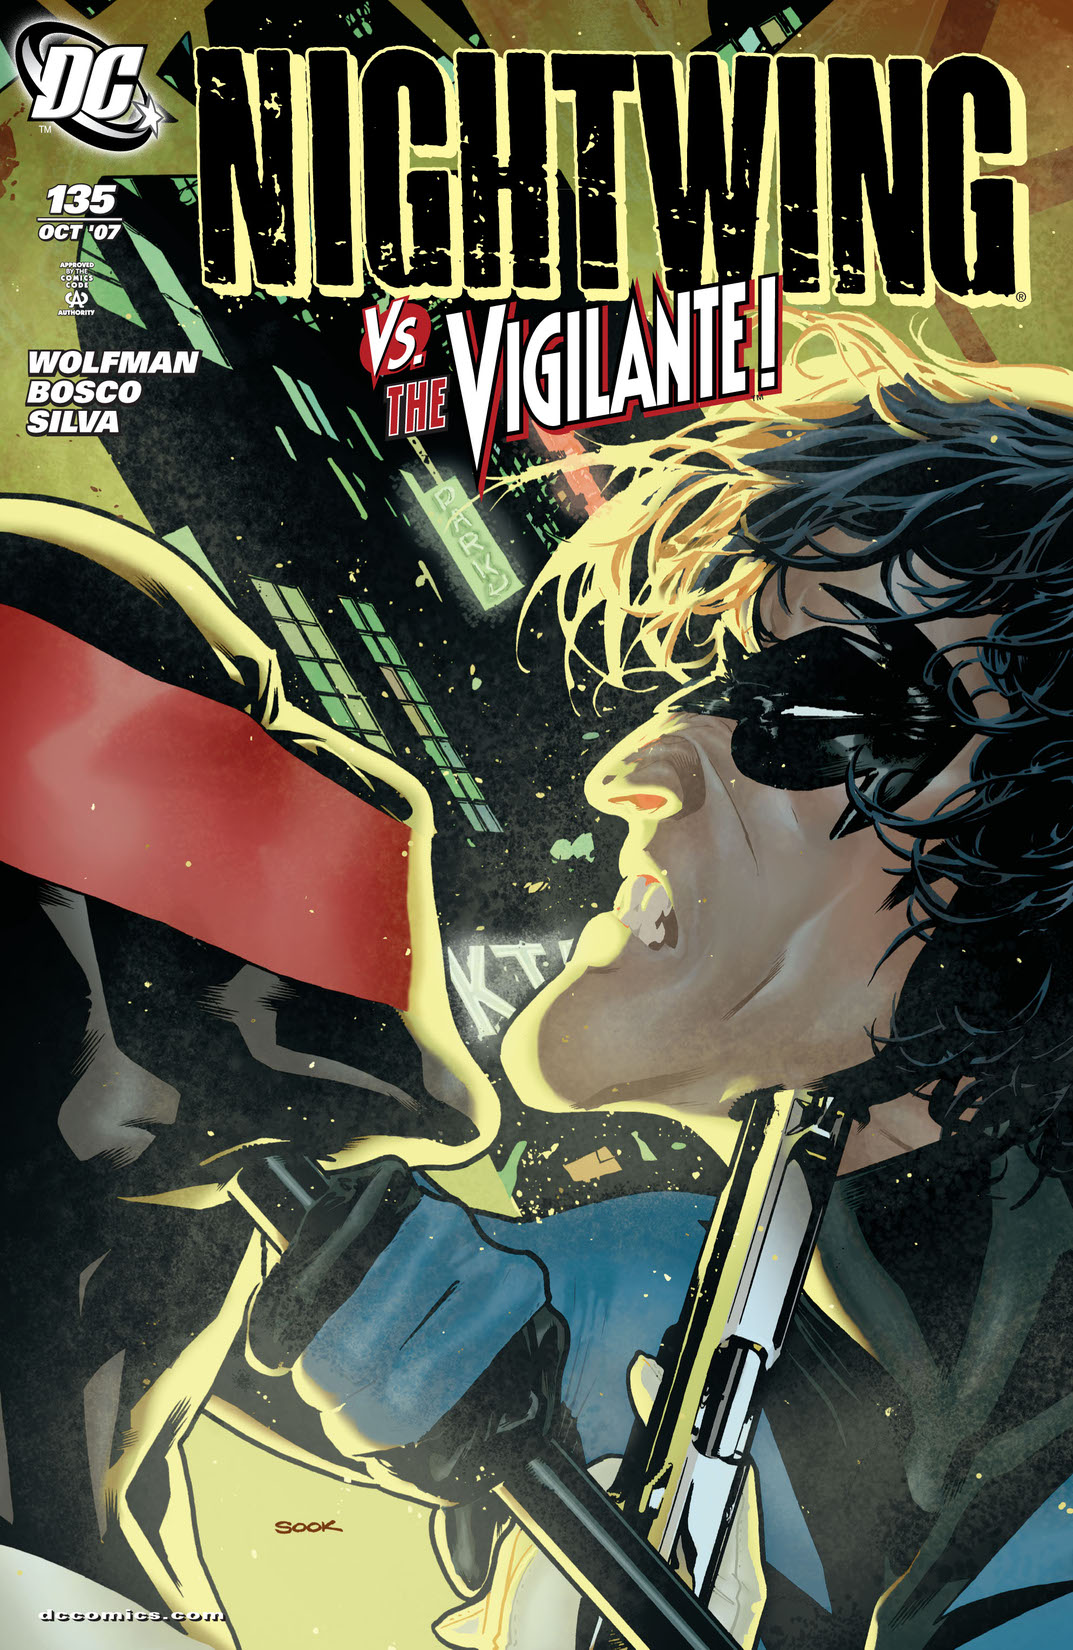 Nightwing (1996-) #135 preview images